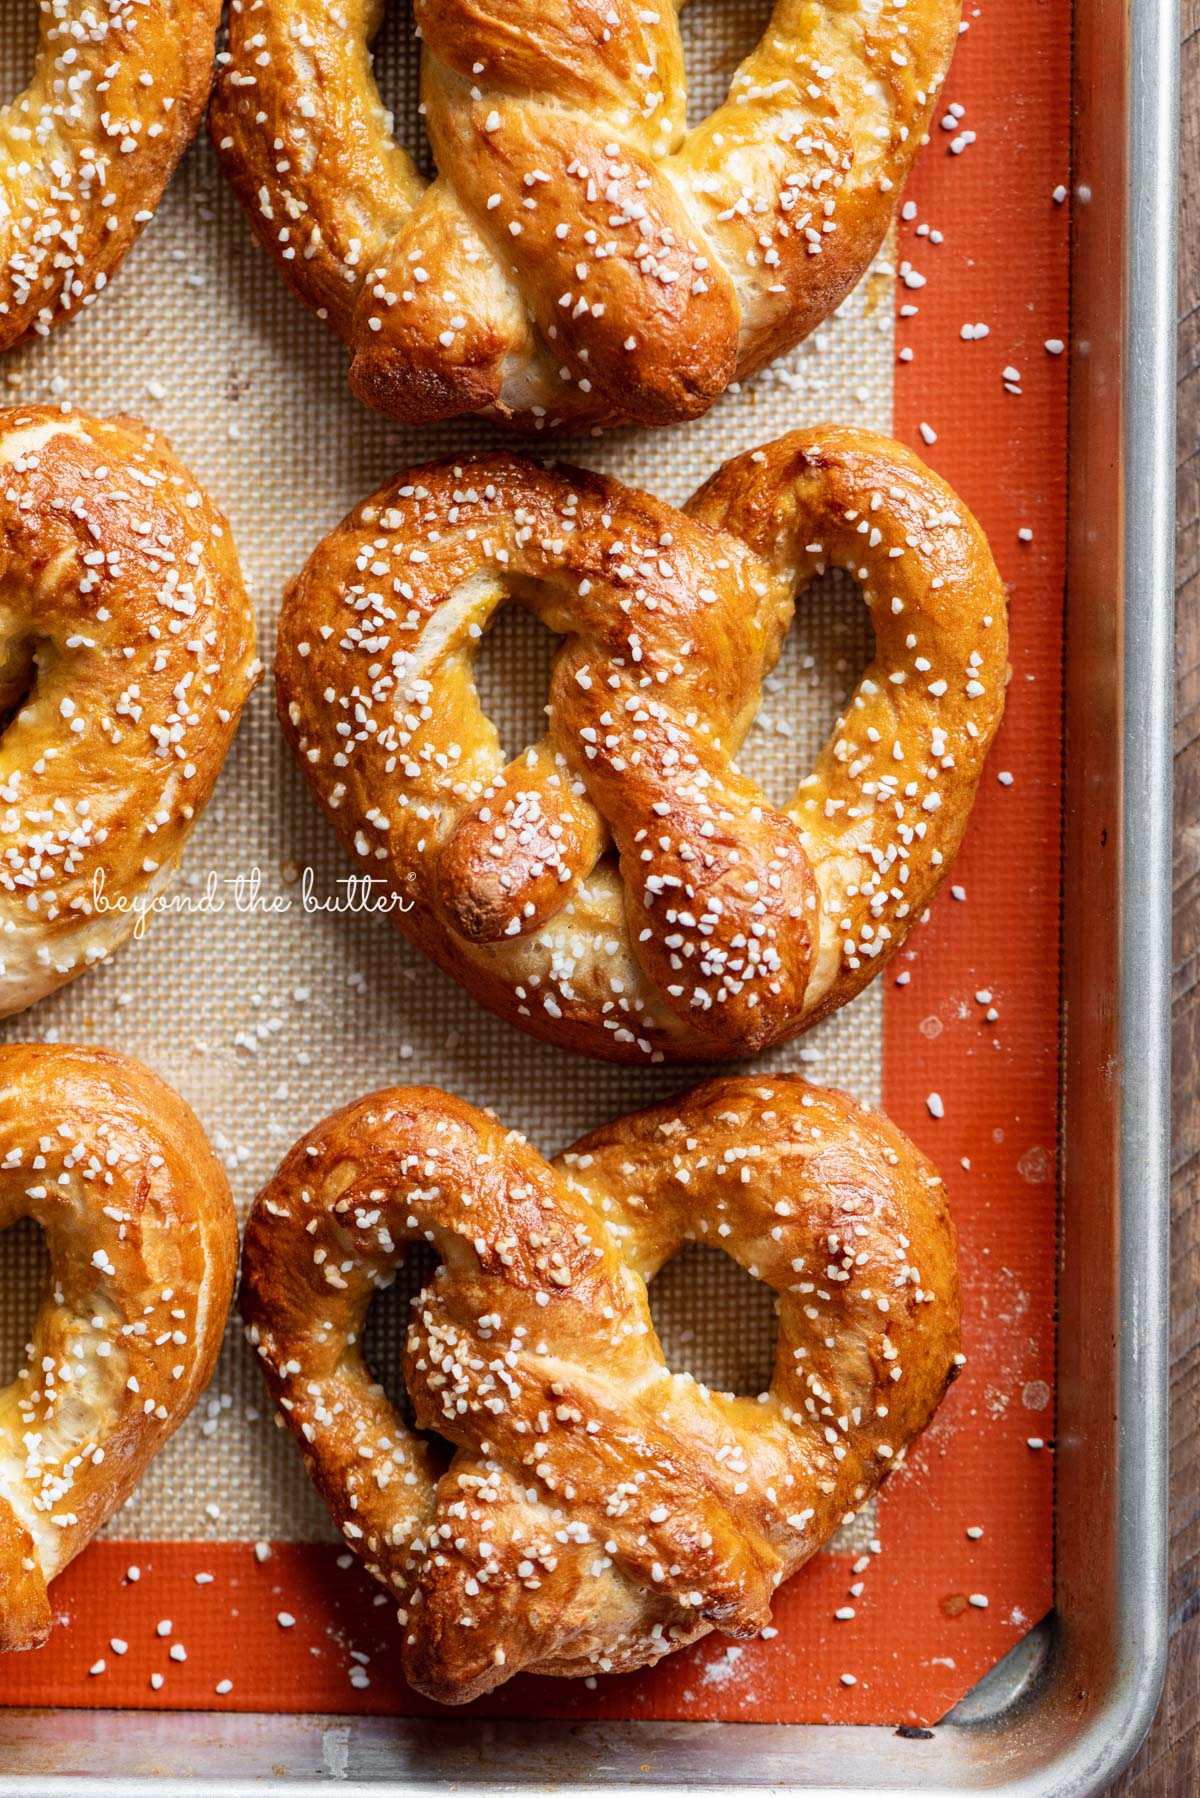 Homemade soft pretzels on a silicone baking mat and baking sheet.